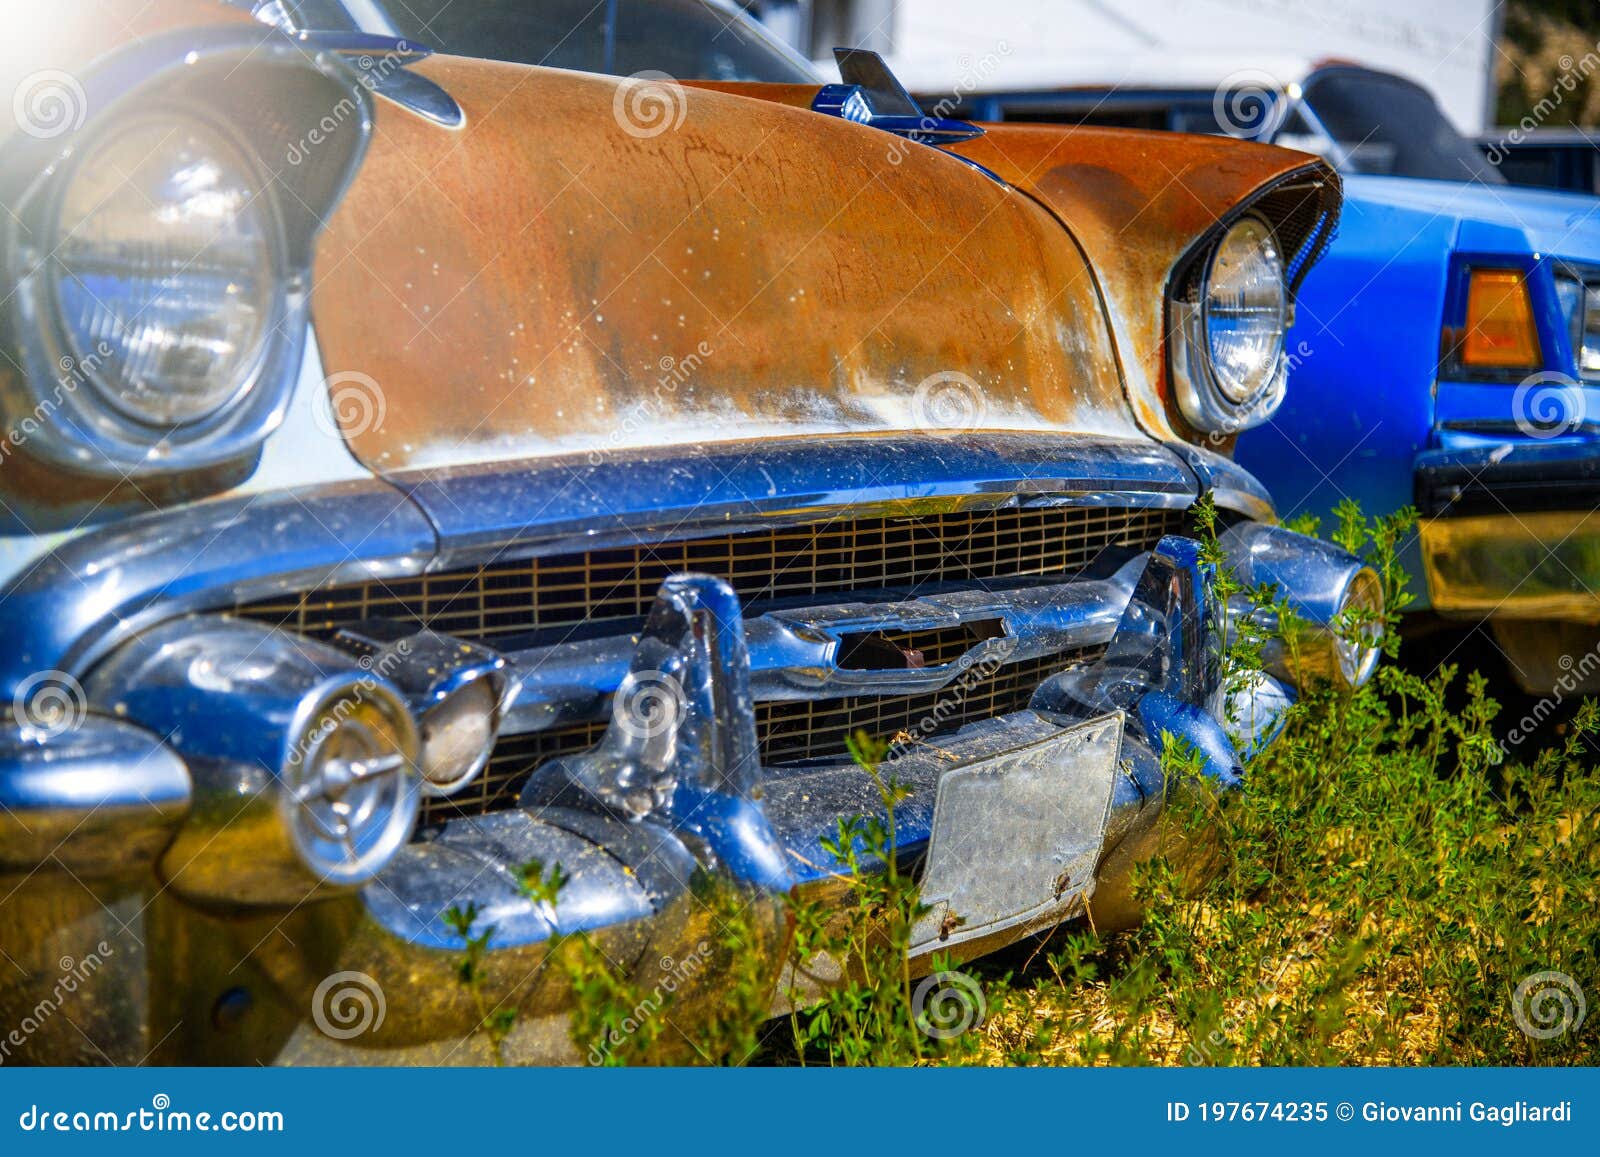 Auto Parts Store in the Middle of the Desert in Summer Season. Old  Automobiles, Cars Wreckage Stock Image - Image of rust, broken: 197674235